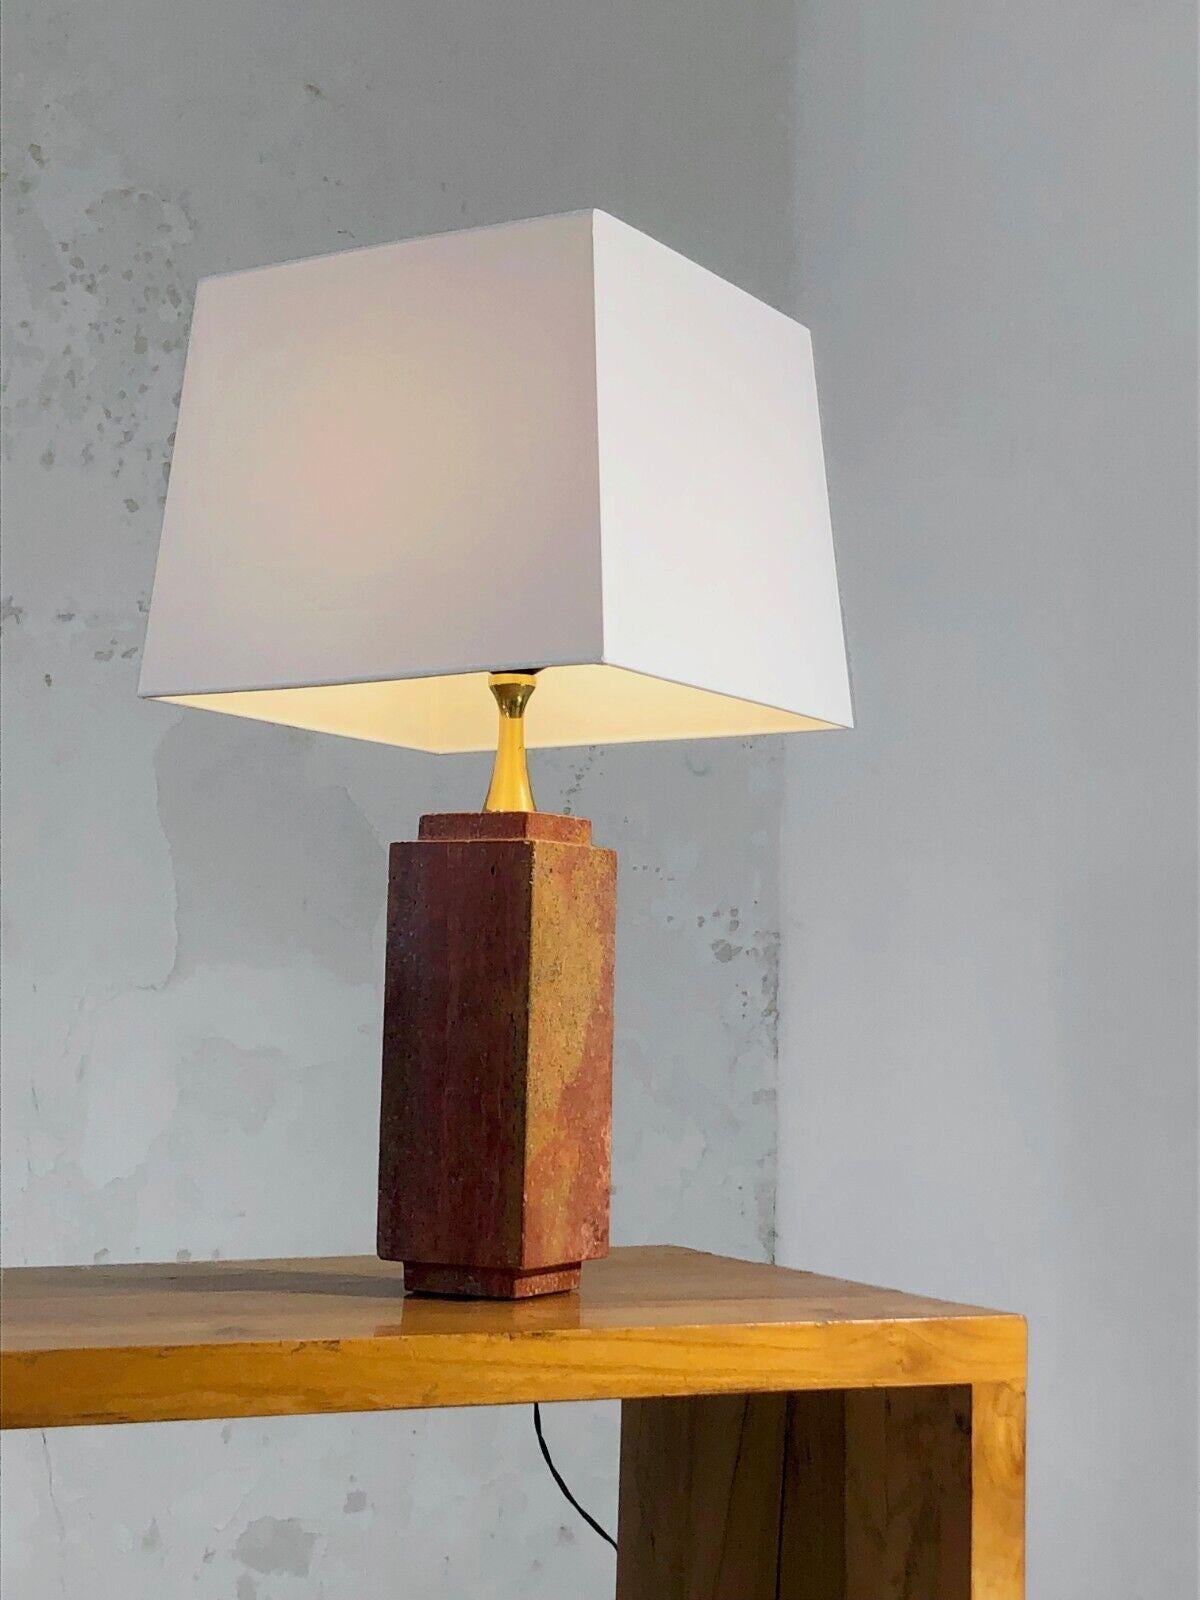 A large luxurious and elegant (and very heavy!) table lamp, Art-Deco, Post-Modernist, Shabby-Chic, large cubic tiered body in solid pink marble, topped by a flared neck in gilded brass and a beautiful lampshade -geometric day which responds to the